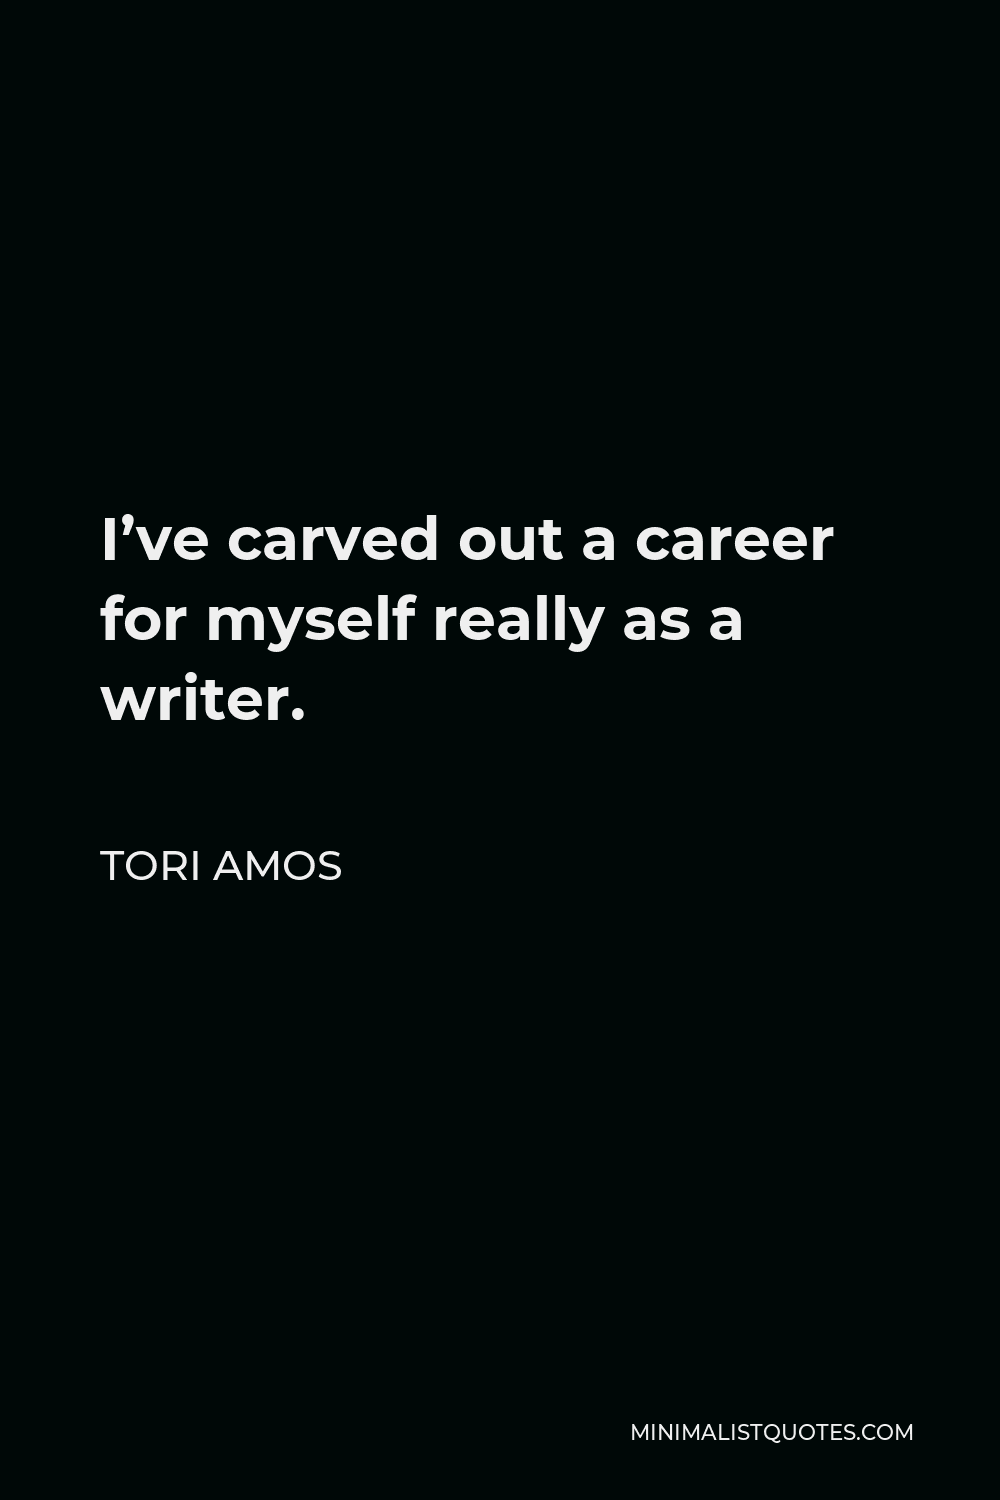 Tori Amos Quote - I’ve carved out a career for myself really as a writer.